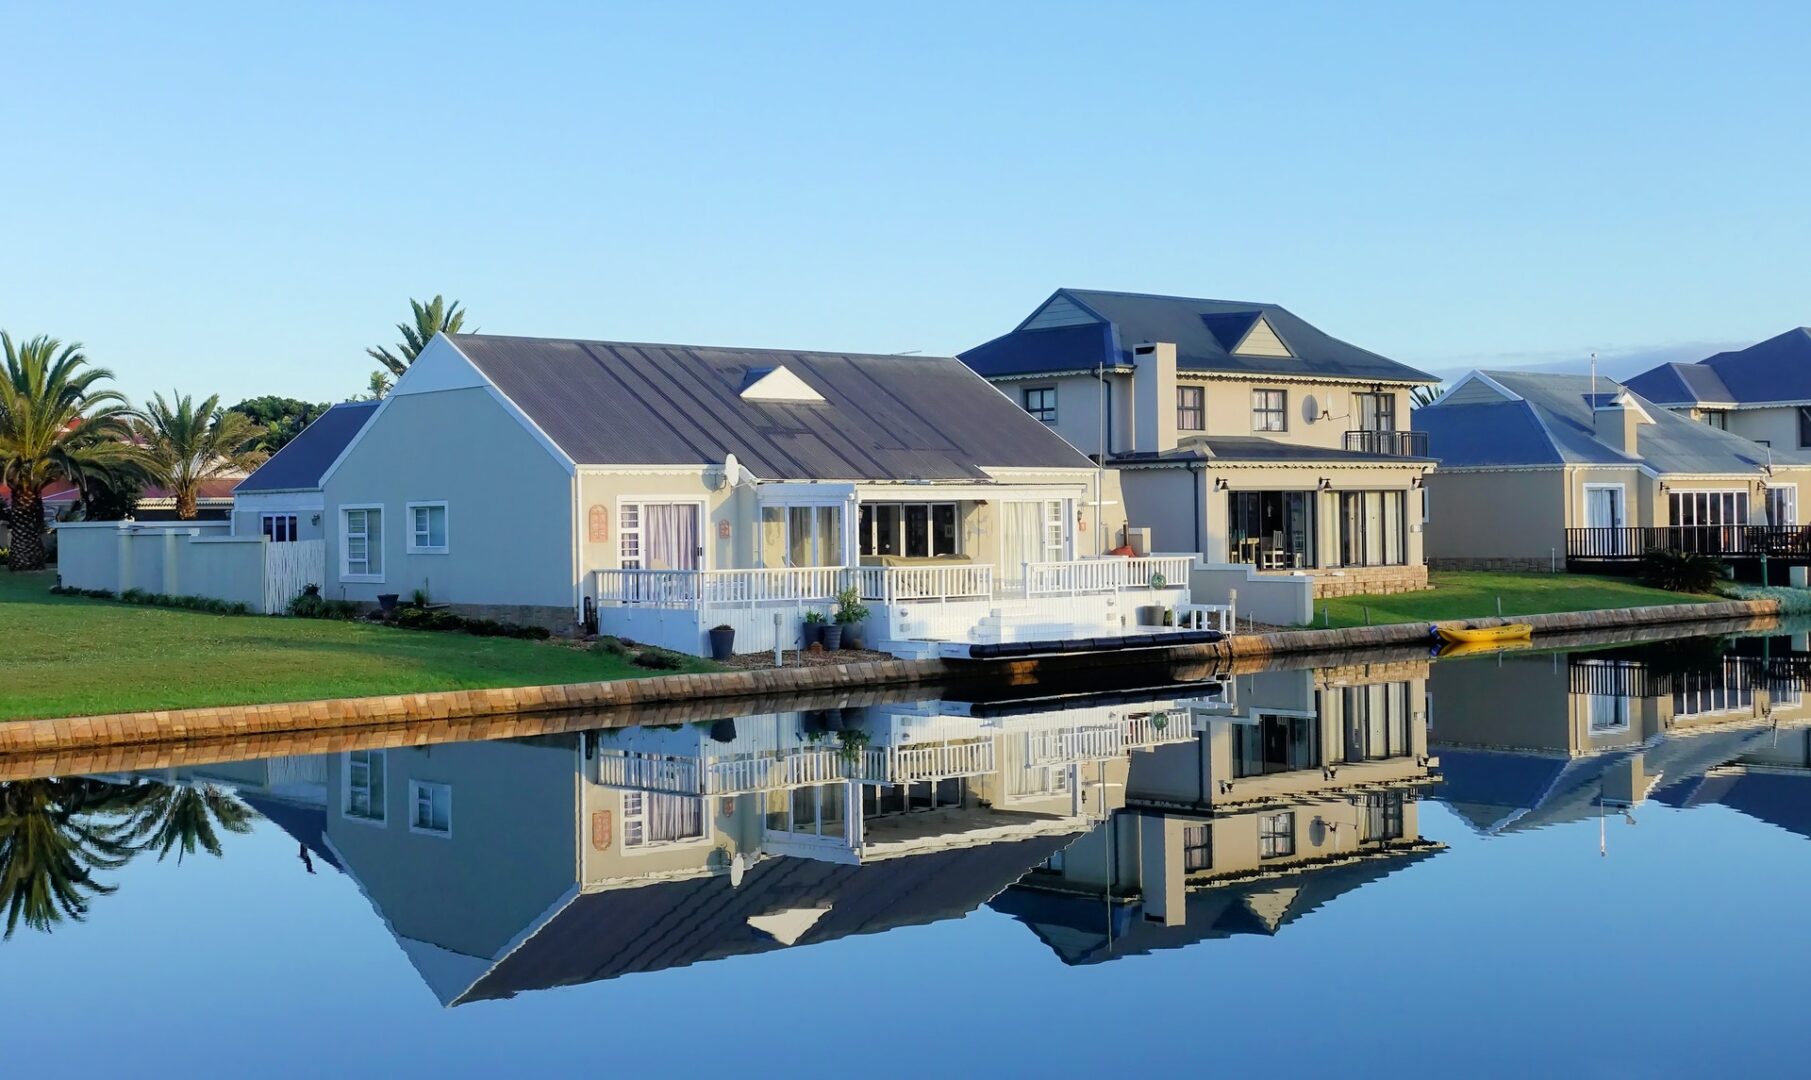 image of homes overlooking a lake